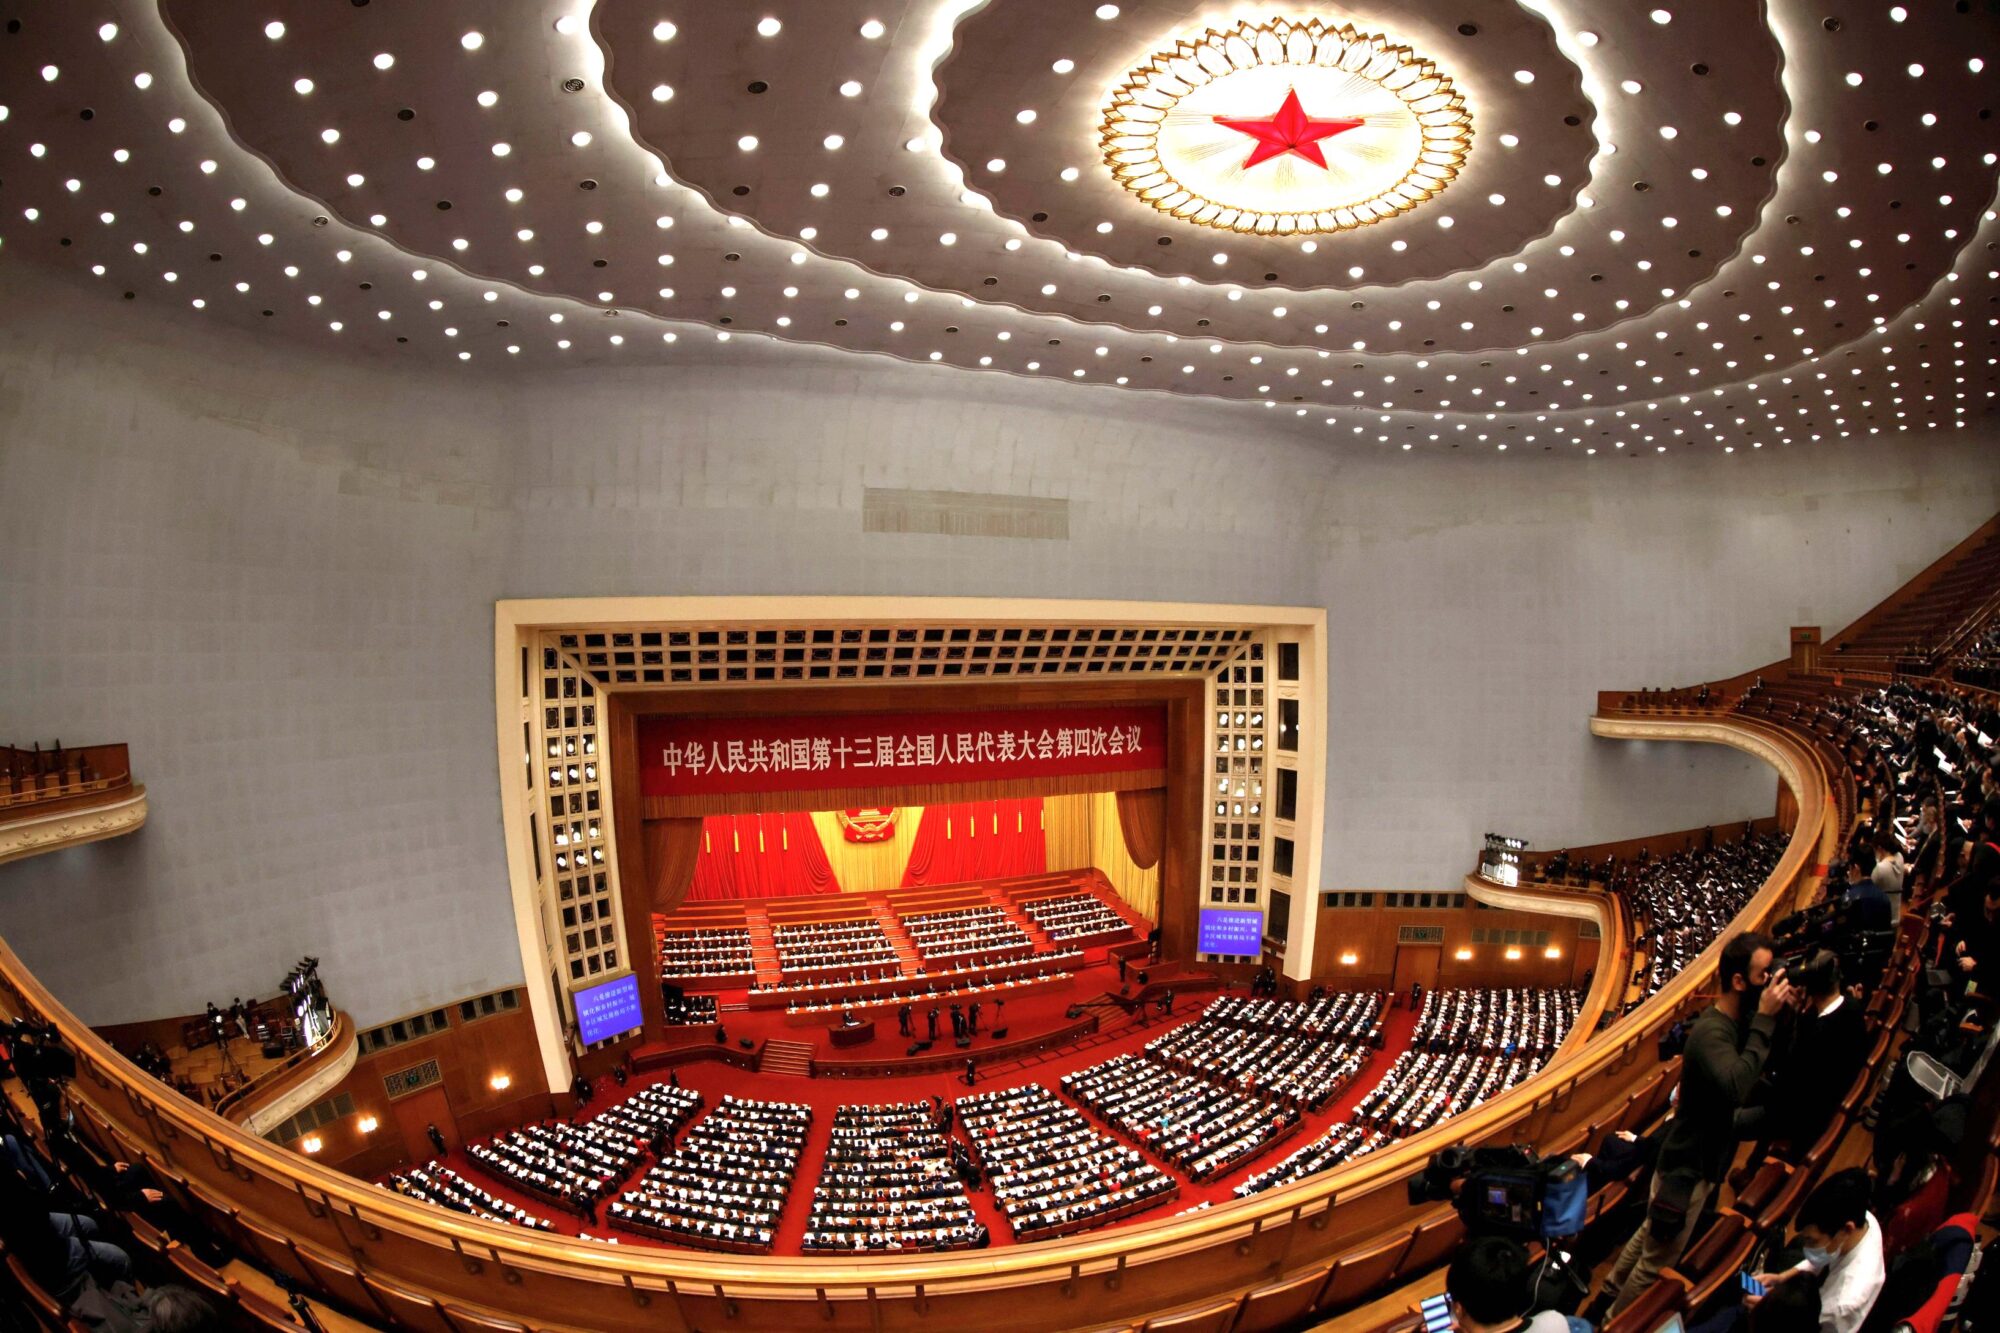 <p>The opening session of the National People’s Congress in Beijing on 5 March (Image: Carlos Garcia Rawlins / Alamy)</p>